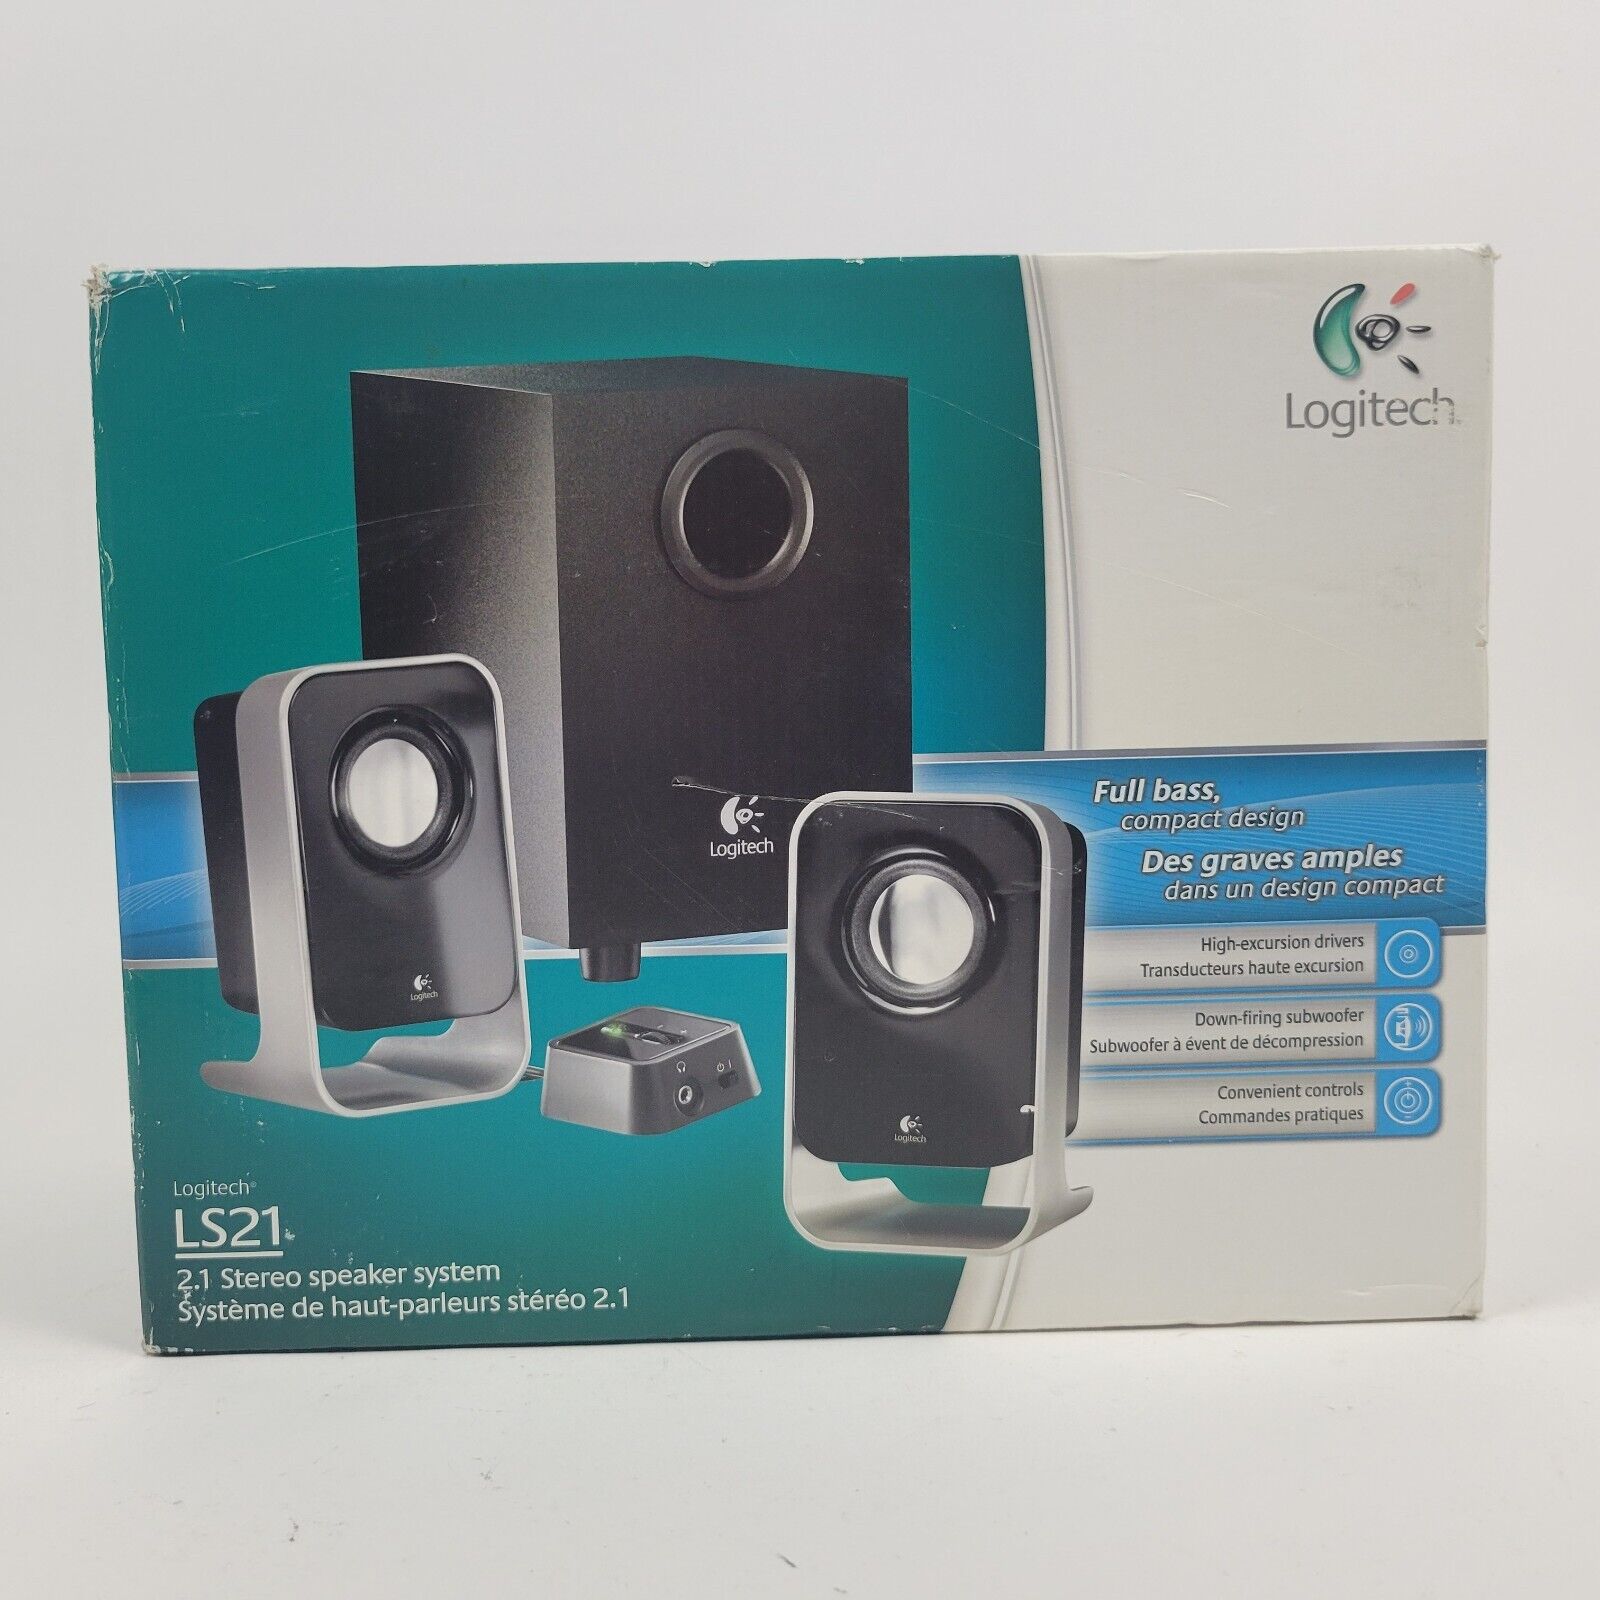 Logitech 2.1 Stereo Speaker System LS21 w/High Excursion Drivers